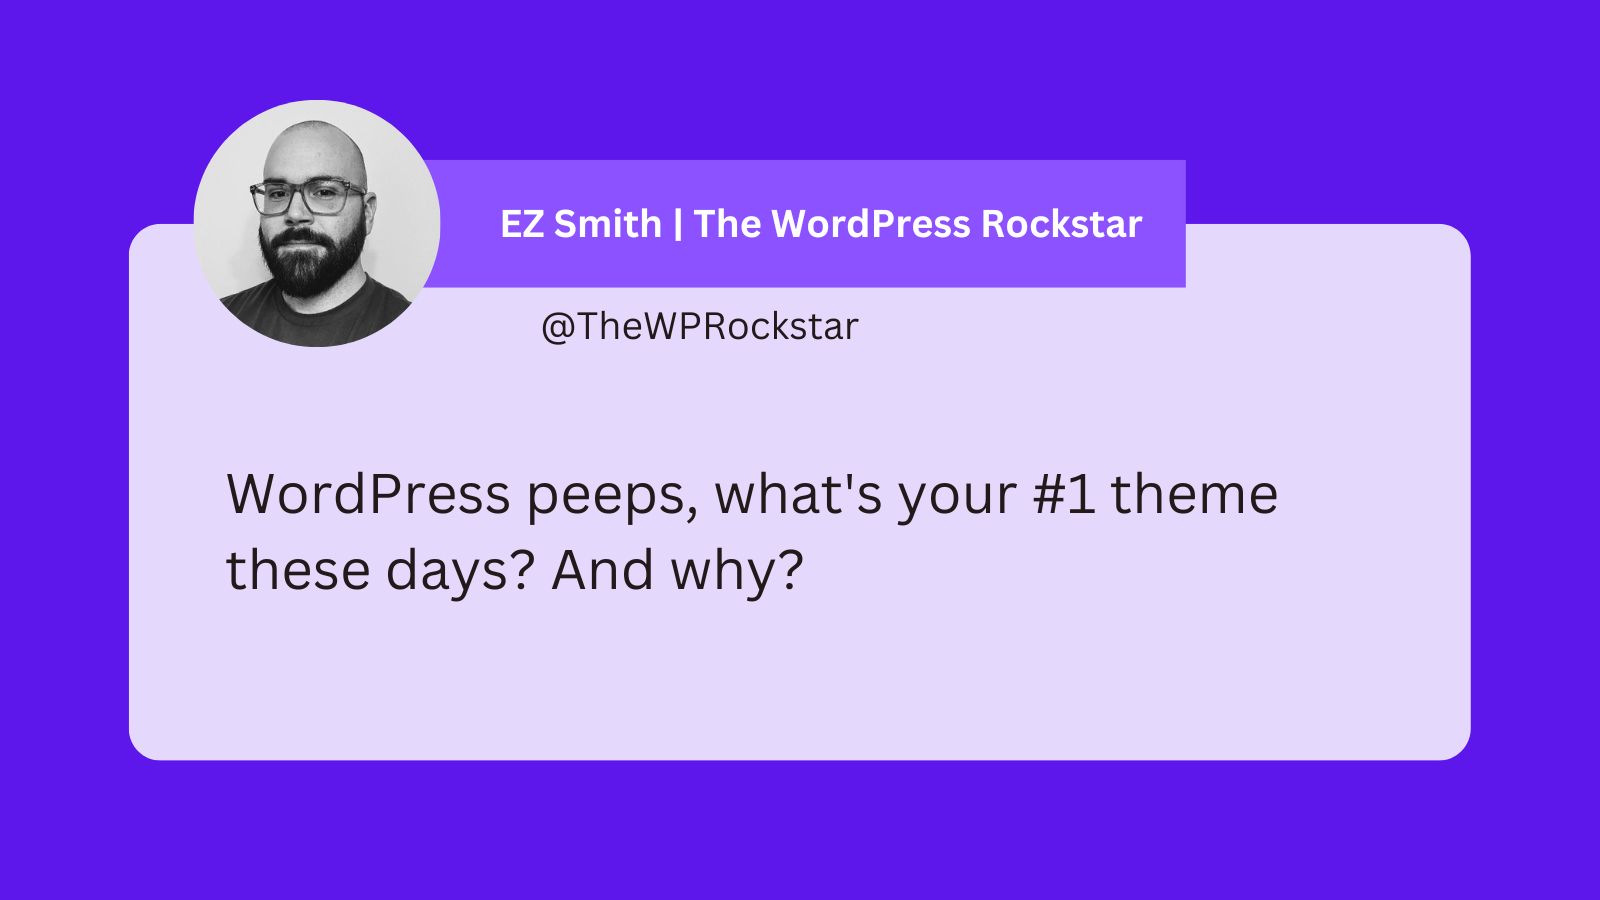 A tweet from EZ Smith that says: WordPress peeps, what's your #1 theme these days? And why?